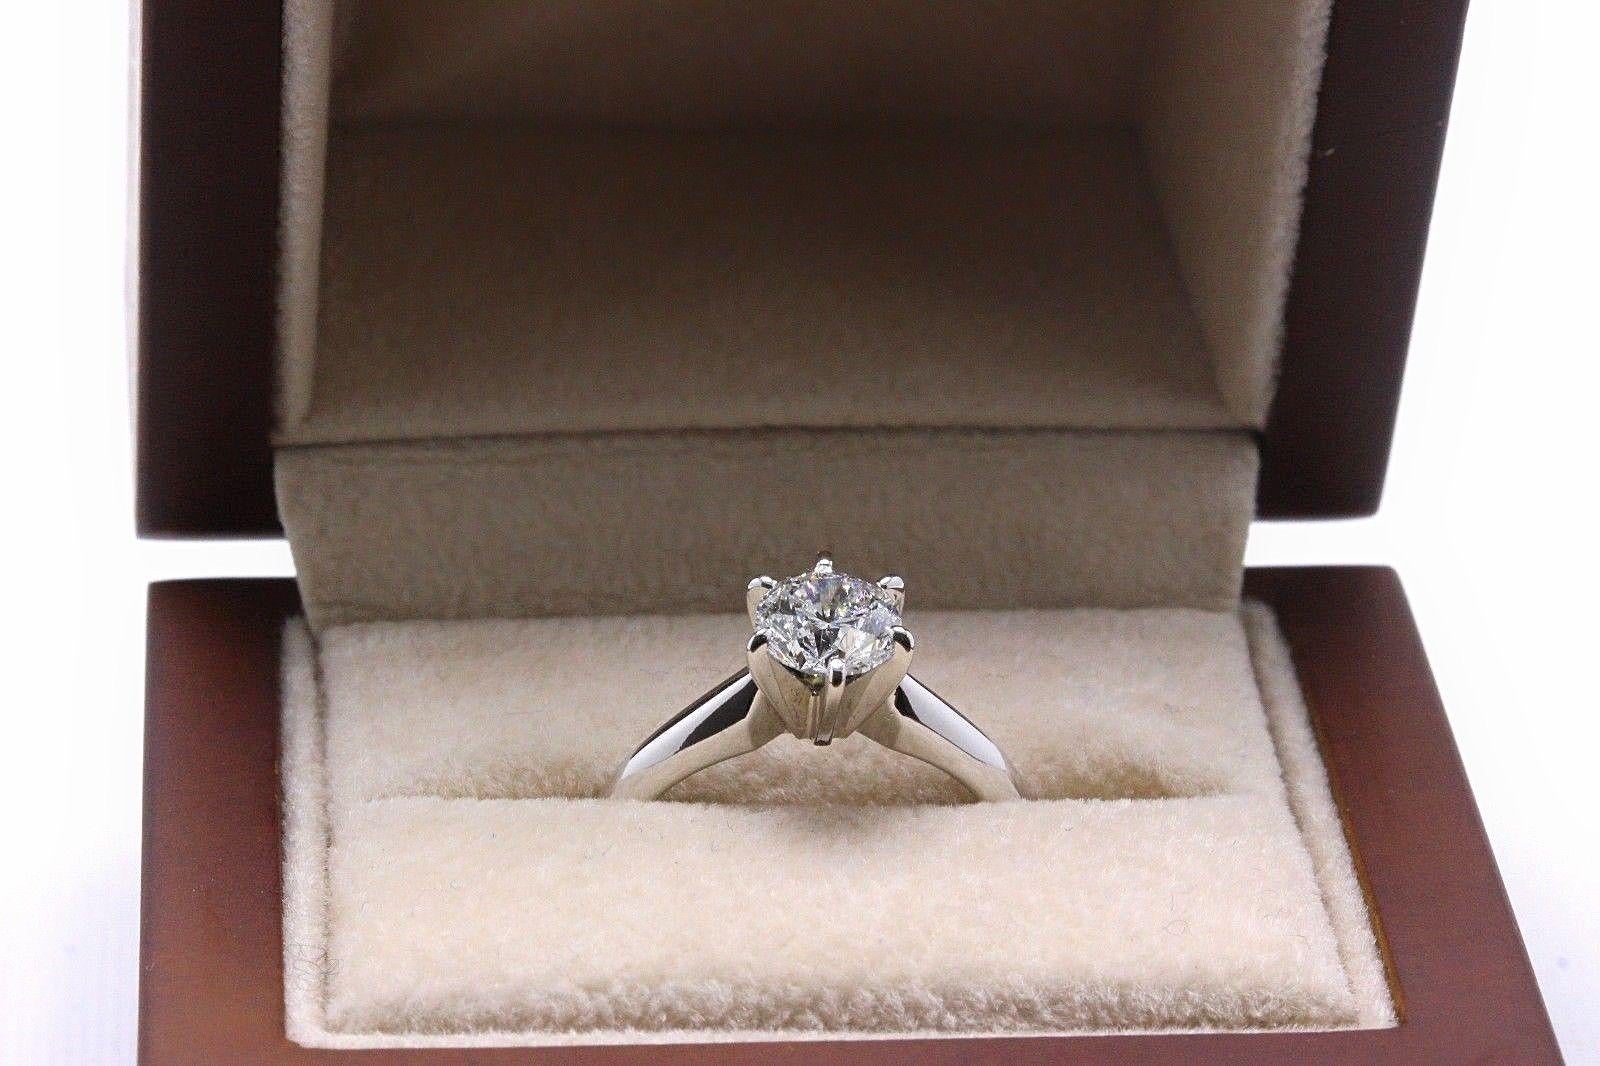 Leo Round Brilliant Diamond Solitaire Engagement Ring 0.97 CT 14KT WG GSI GEMX For Sale 4